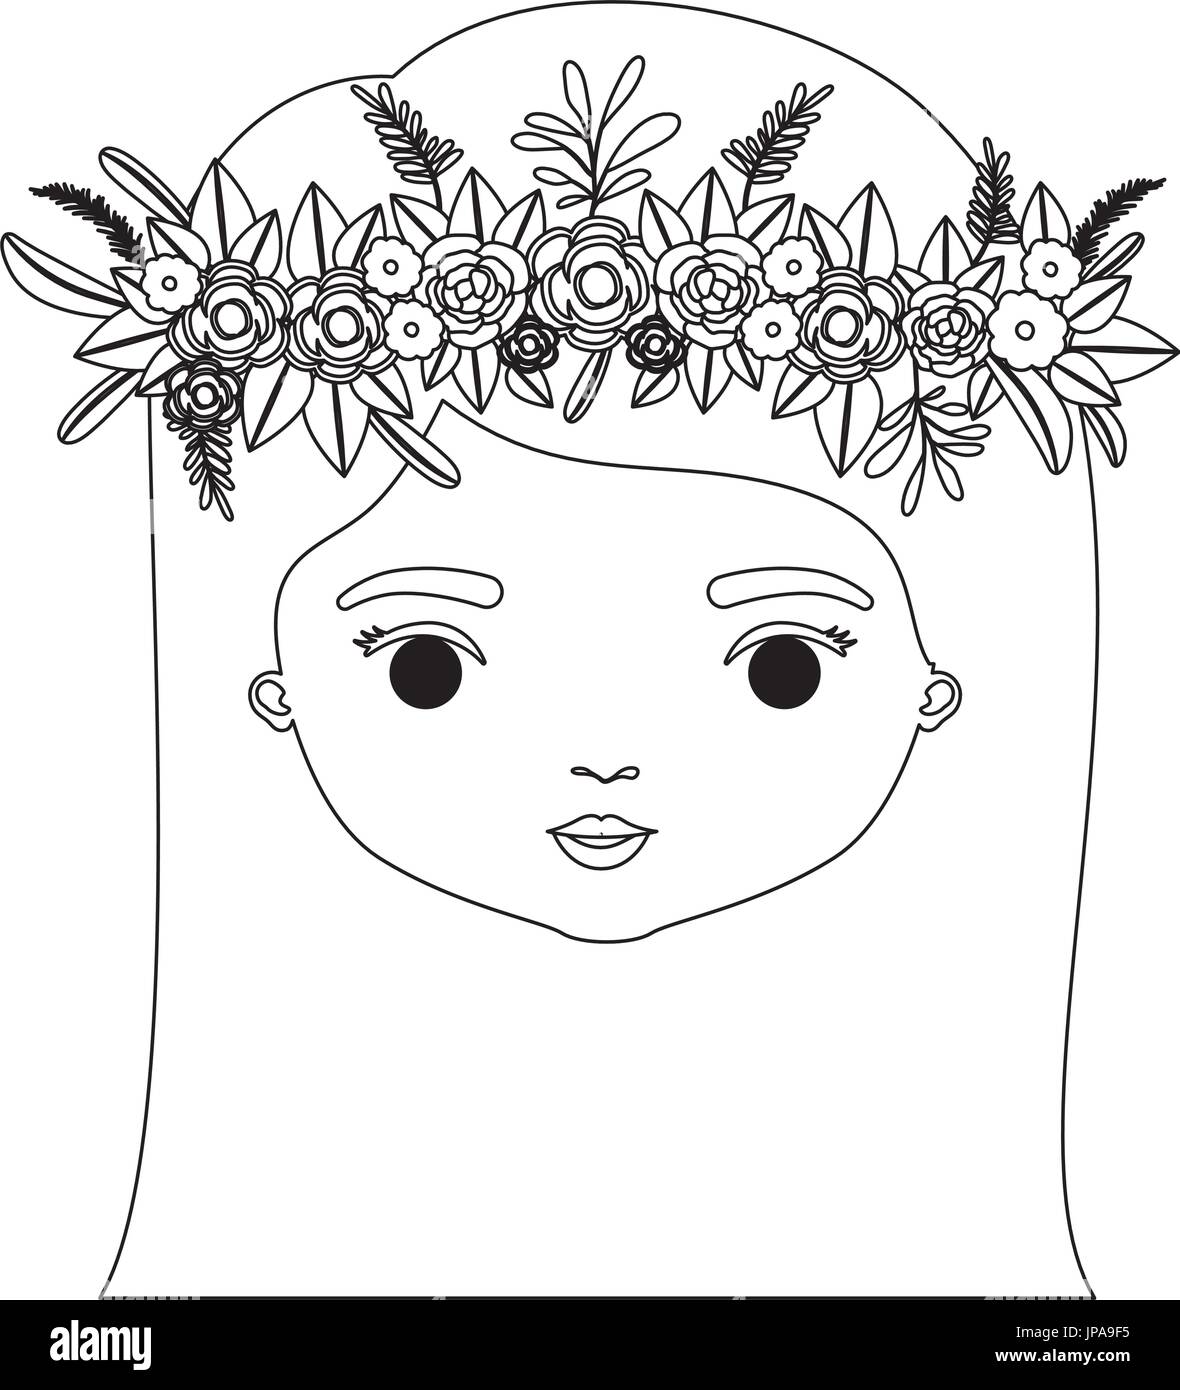 monochrome silhouette of caricature closeup front view face woman with straigh medium hairstyle and crown decorate with flowers Stock Vector